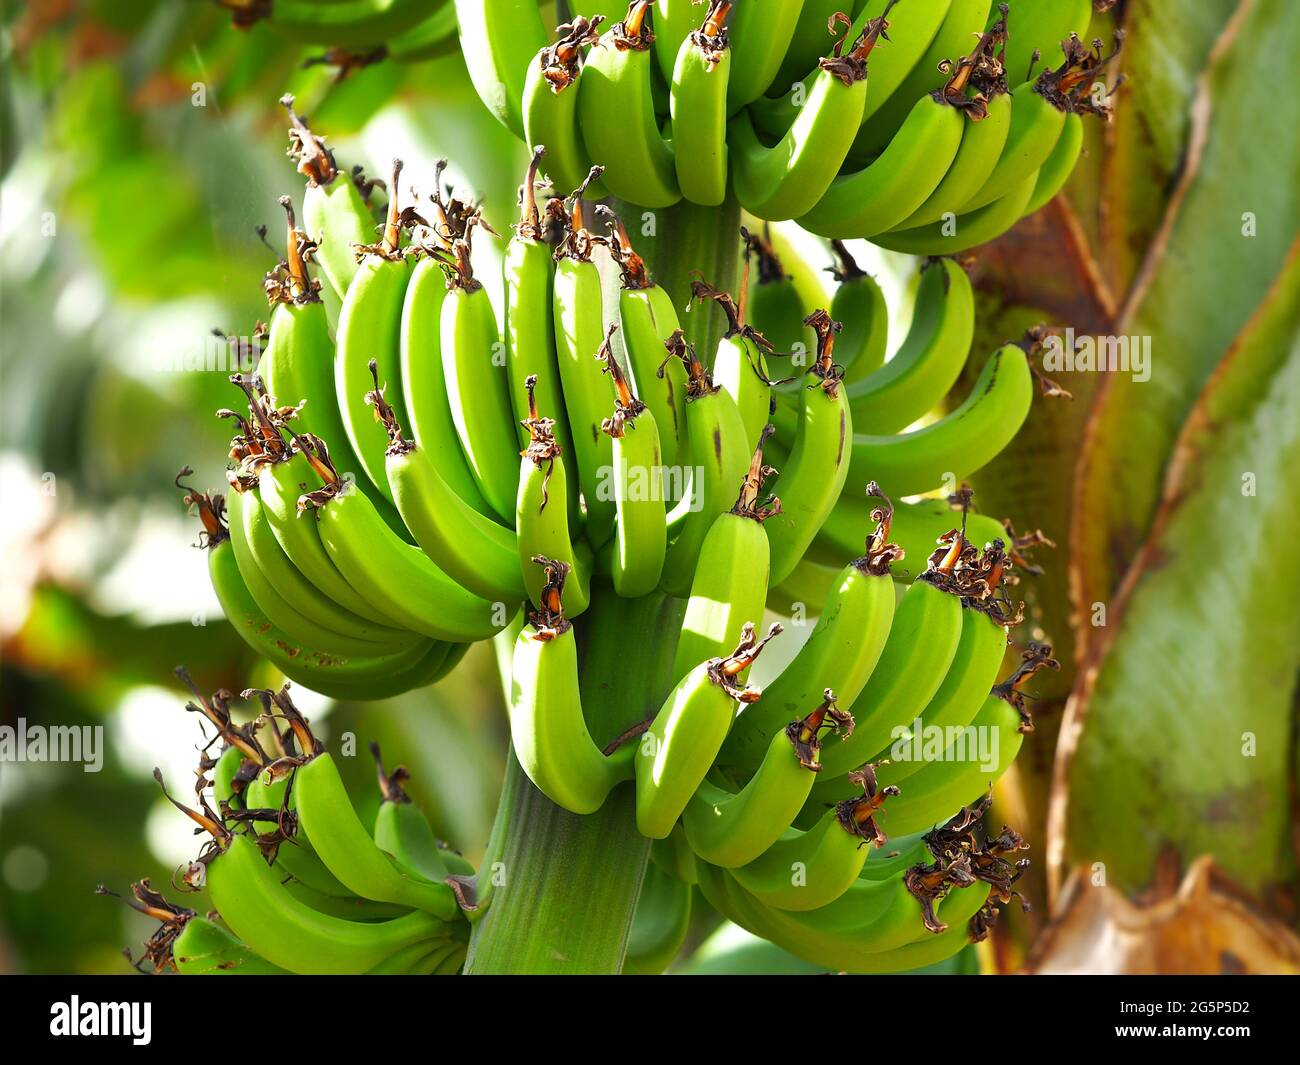 Close-up unches of unripe green bananas in sunlight. Macro shot of bananas on a blurred background. Stock Photo